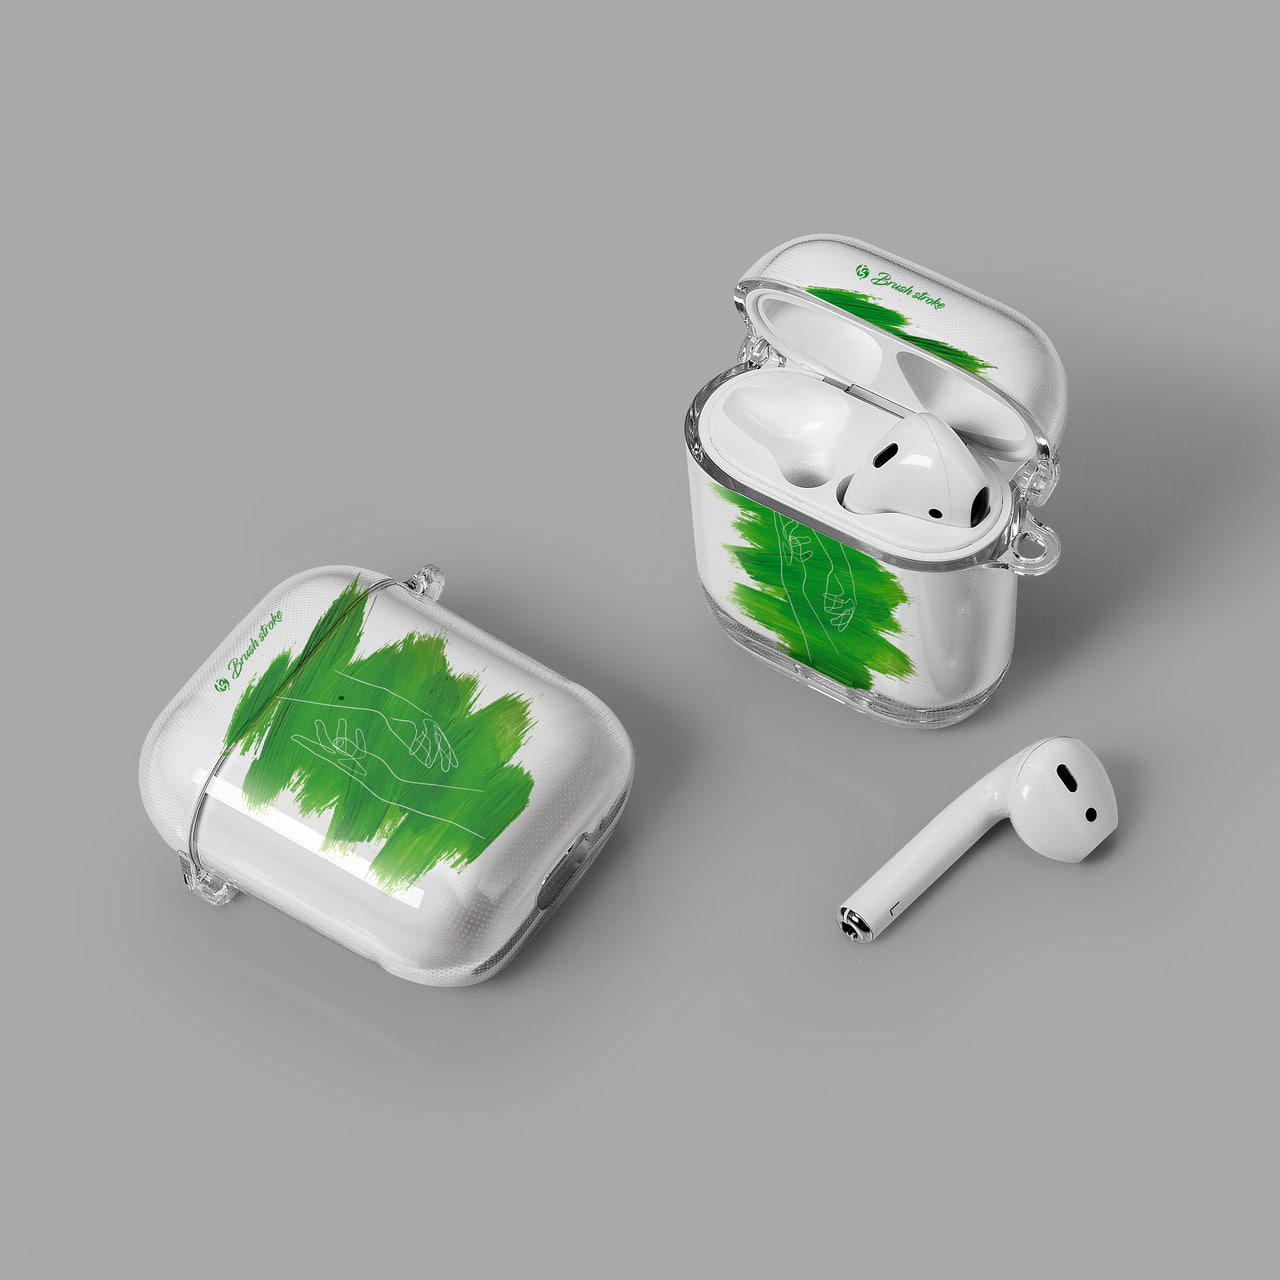 [Airpods cases] Brushstrokes No.13